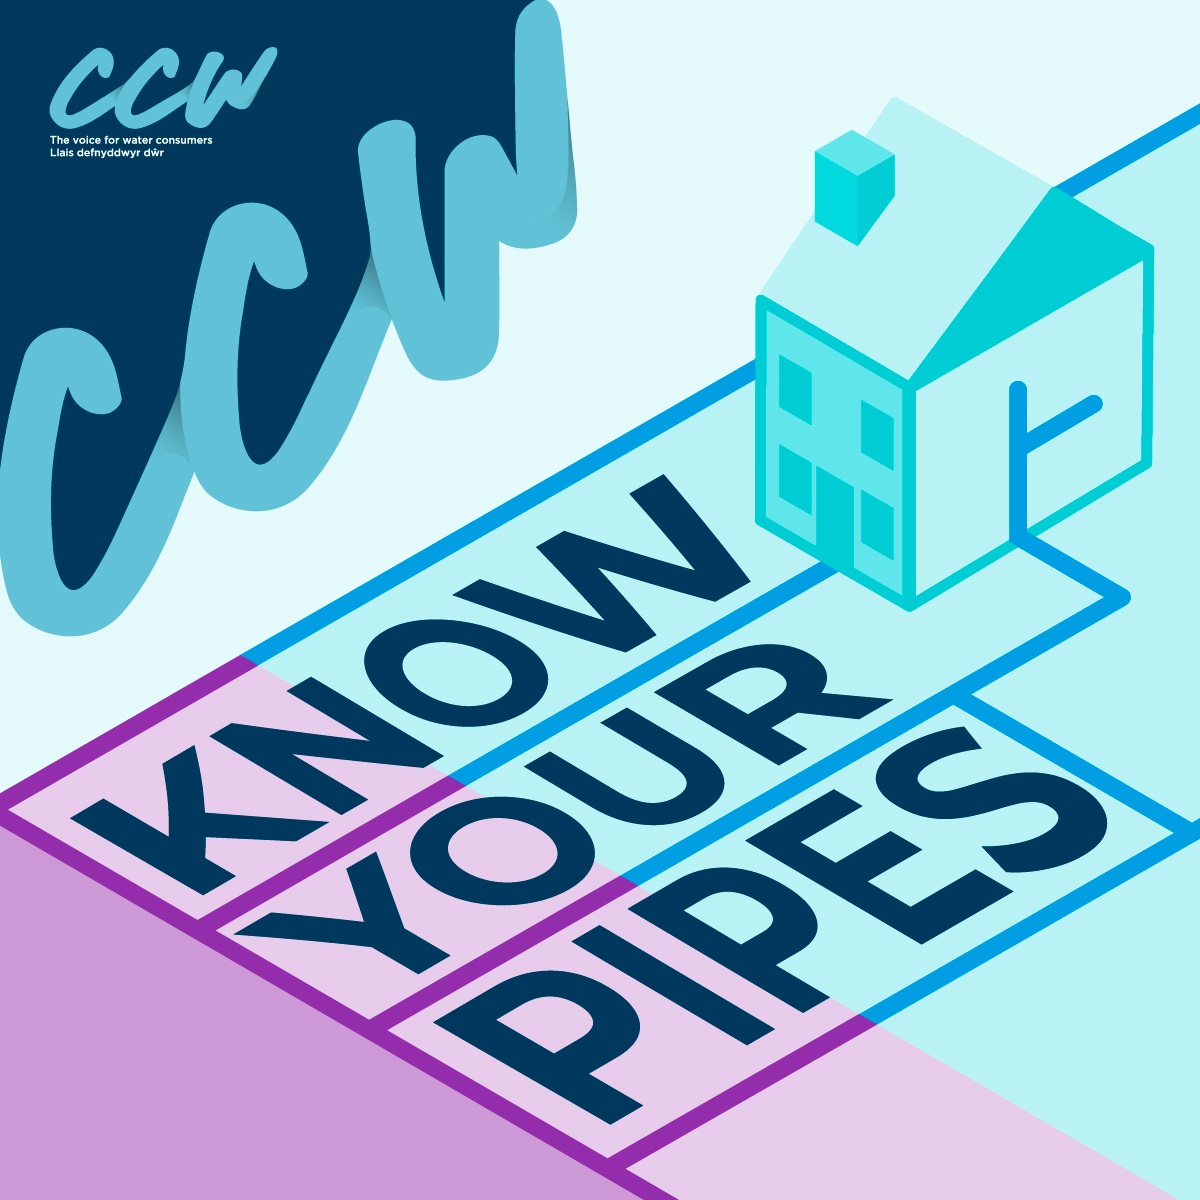 If you had an issue with your water pipes such as a leak would you know what to do or who was responsible for the repair? Visit our infographic to find out more #KnowYourPipes orlo.uk/S7rBC